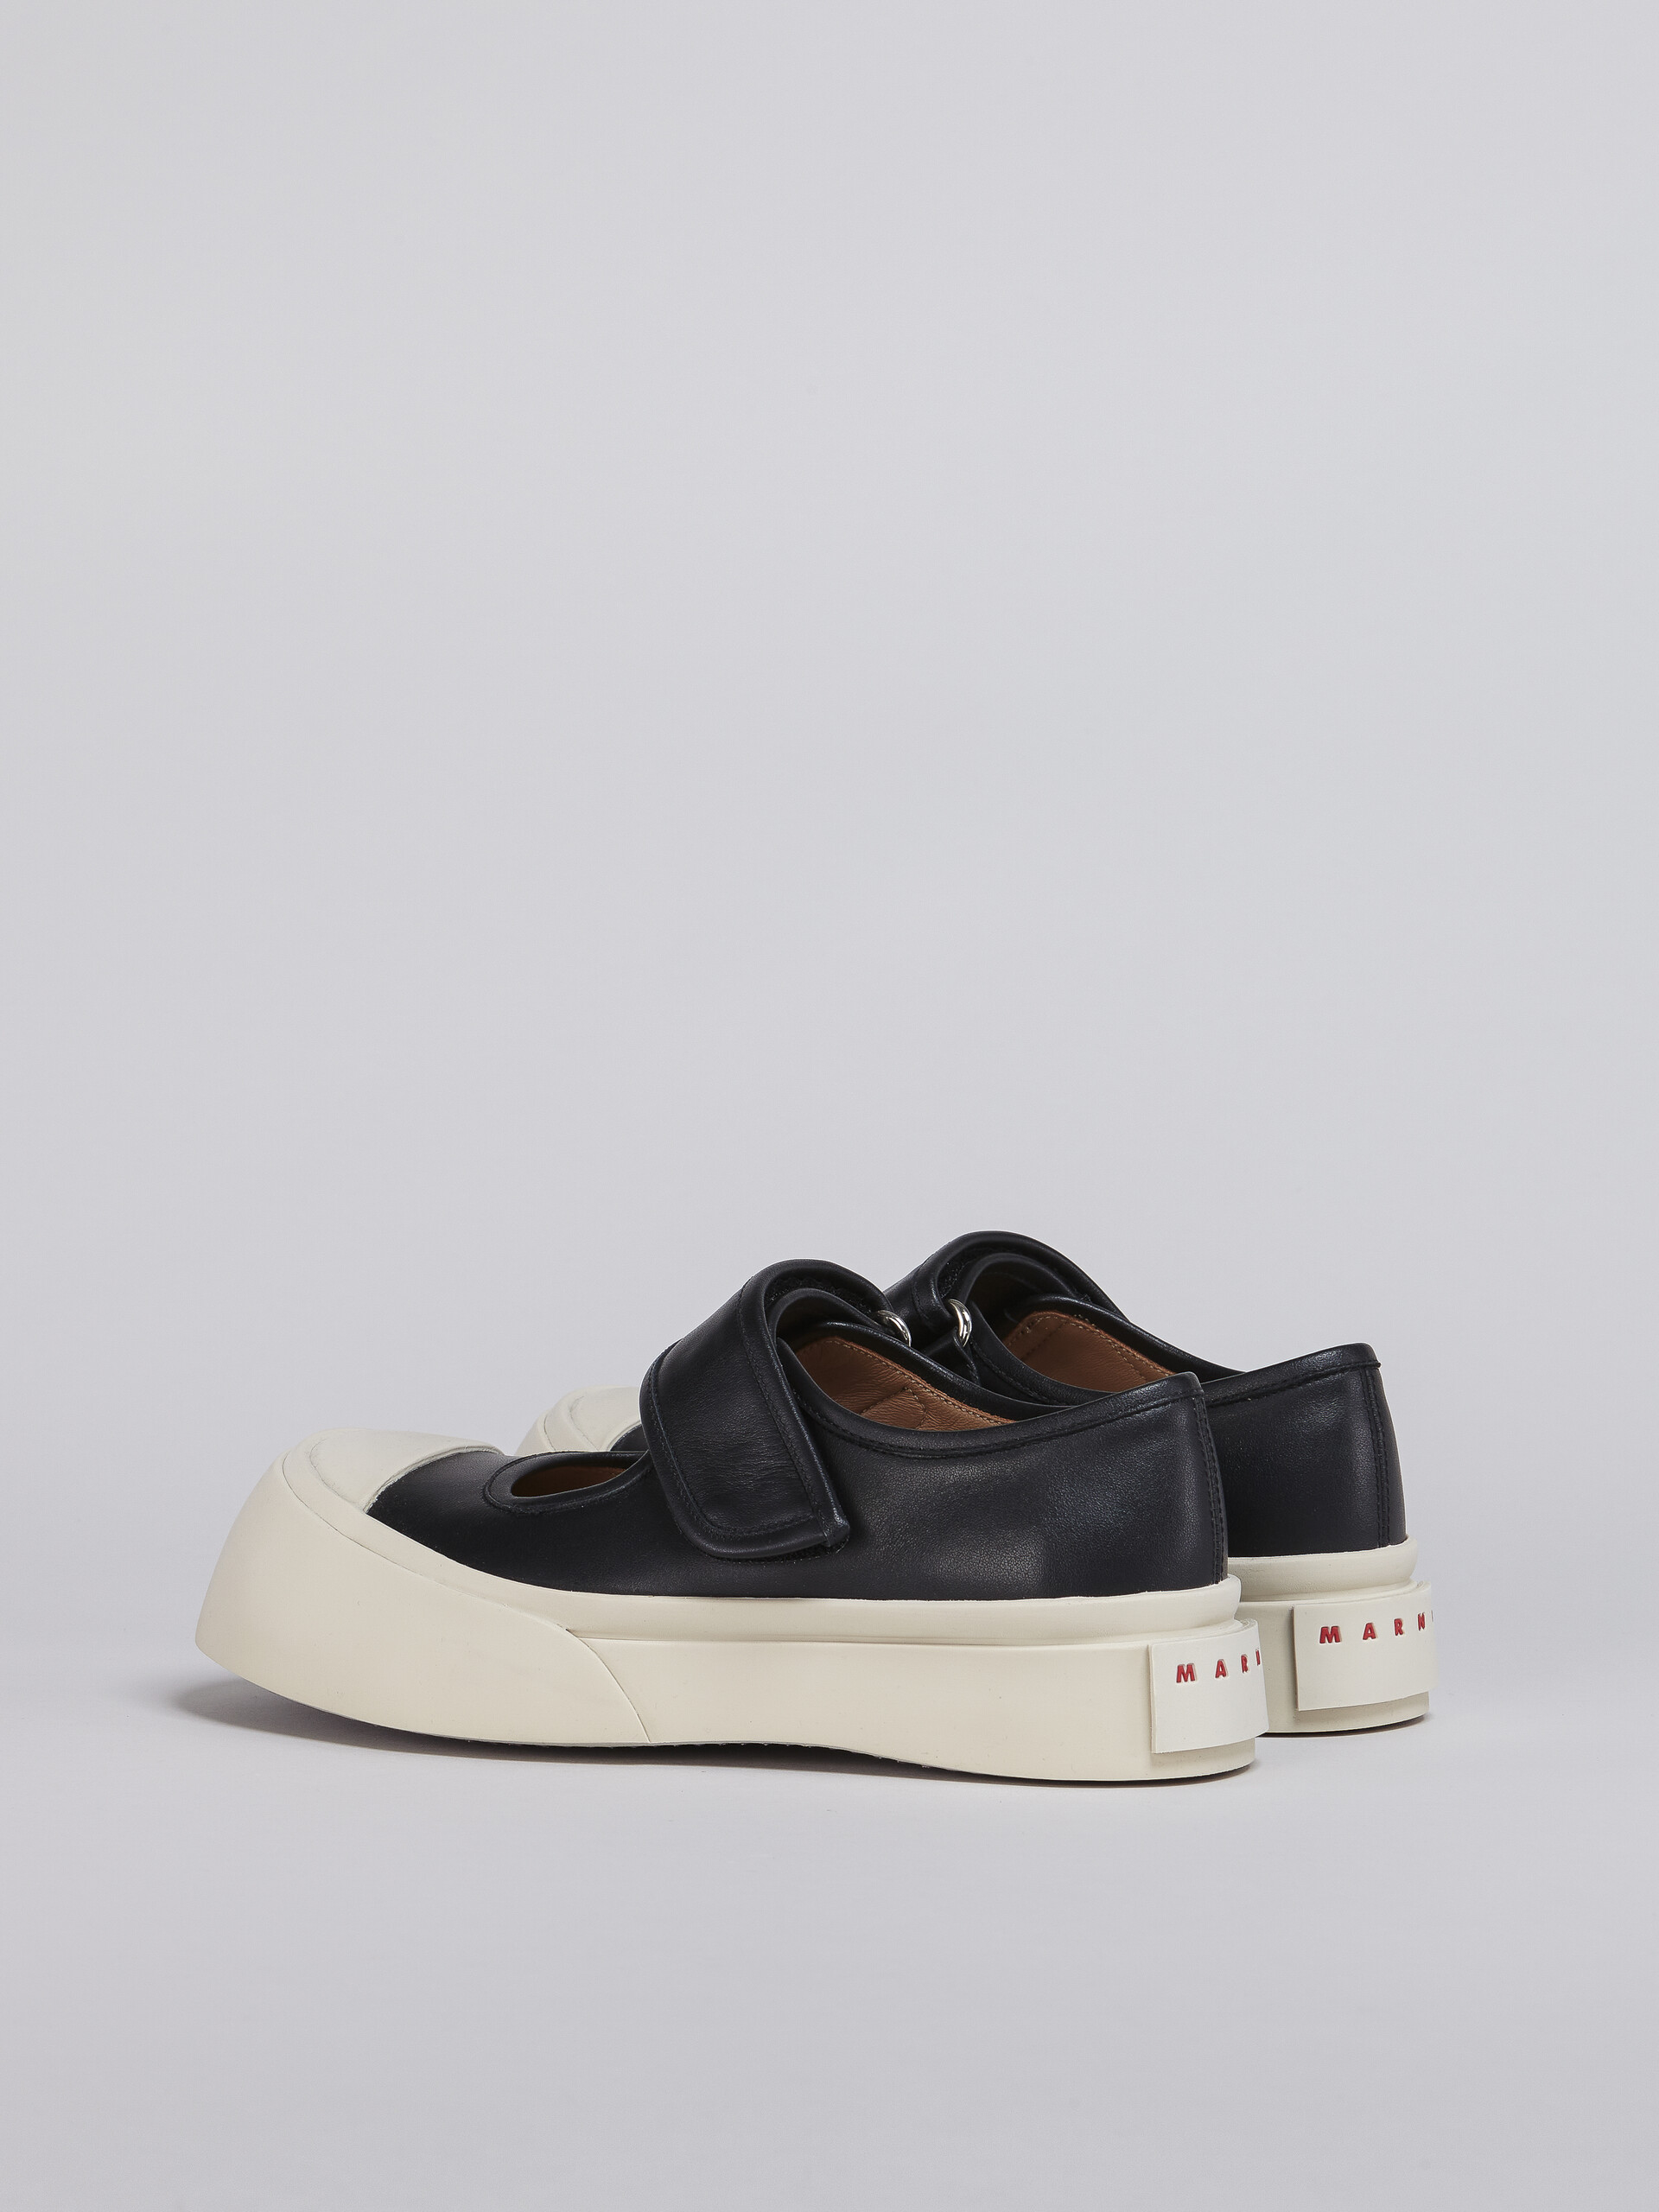 Black nappa leather PABLO Mary-Jane sneaker - Sneakers - Image 3